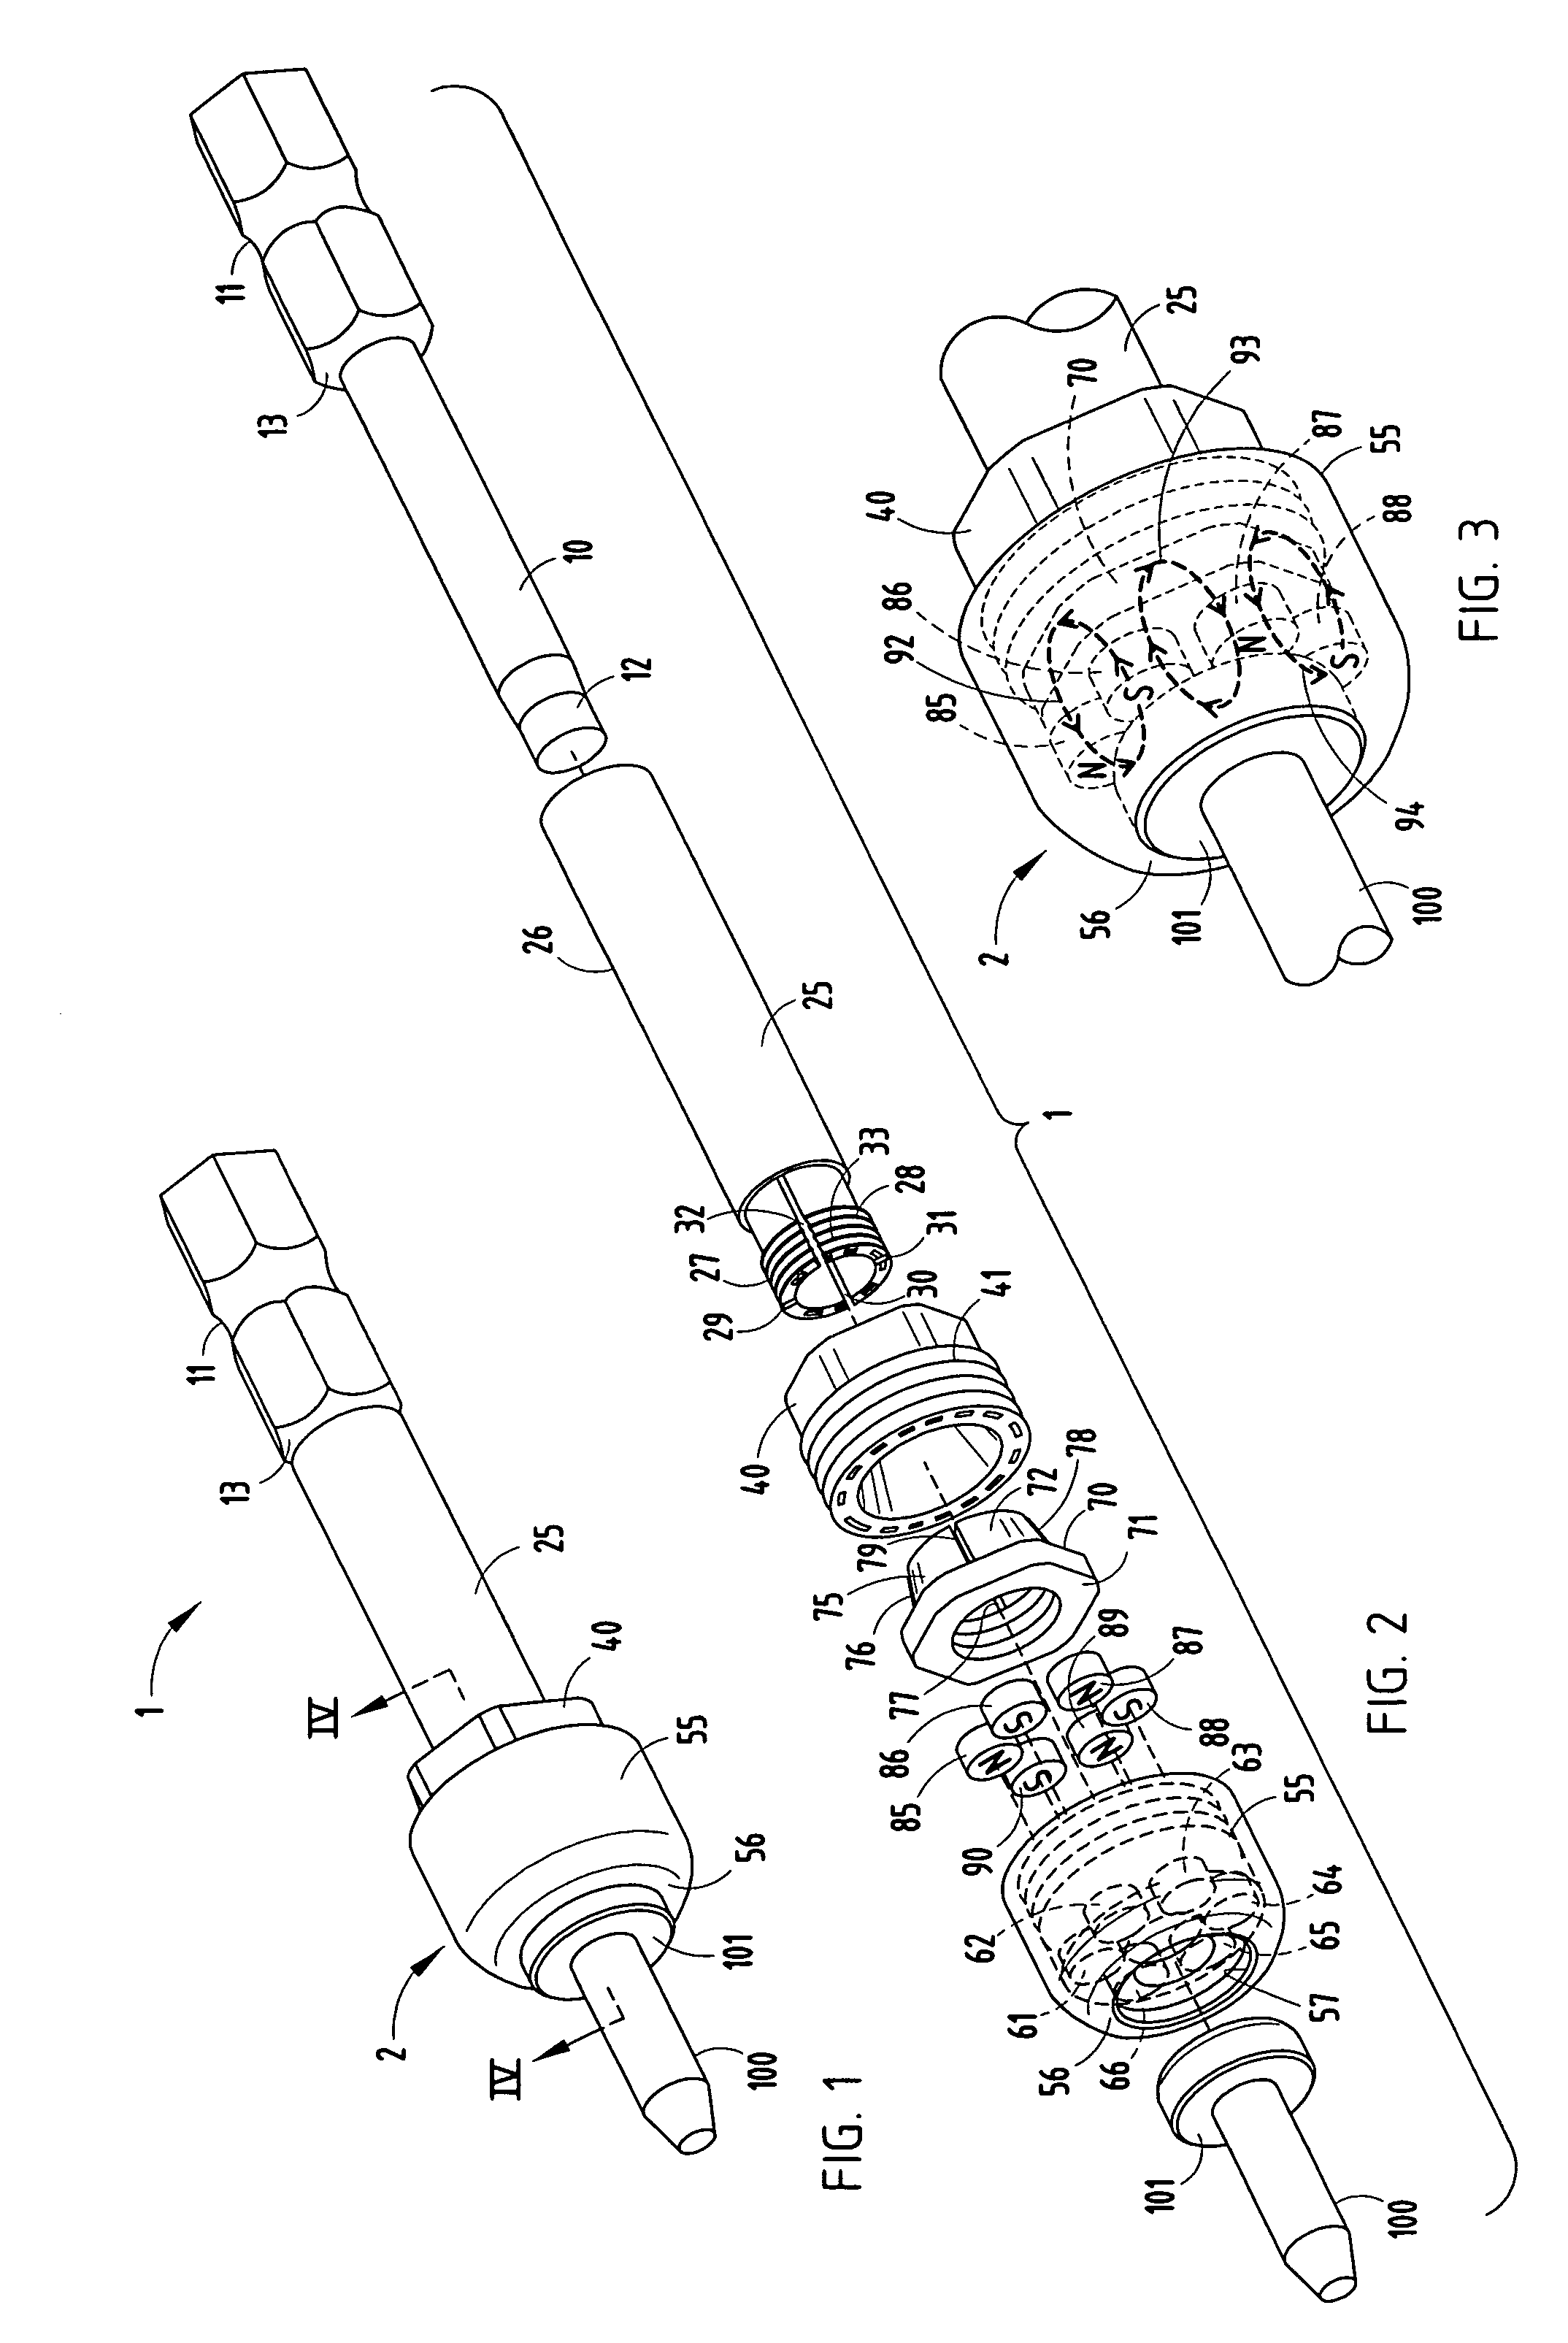 Magnetic device for attracting and retaining fasteners